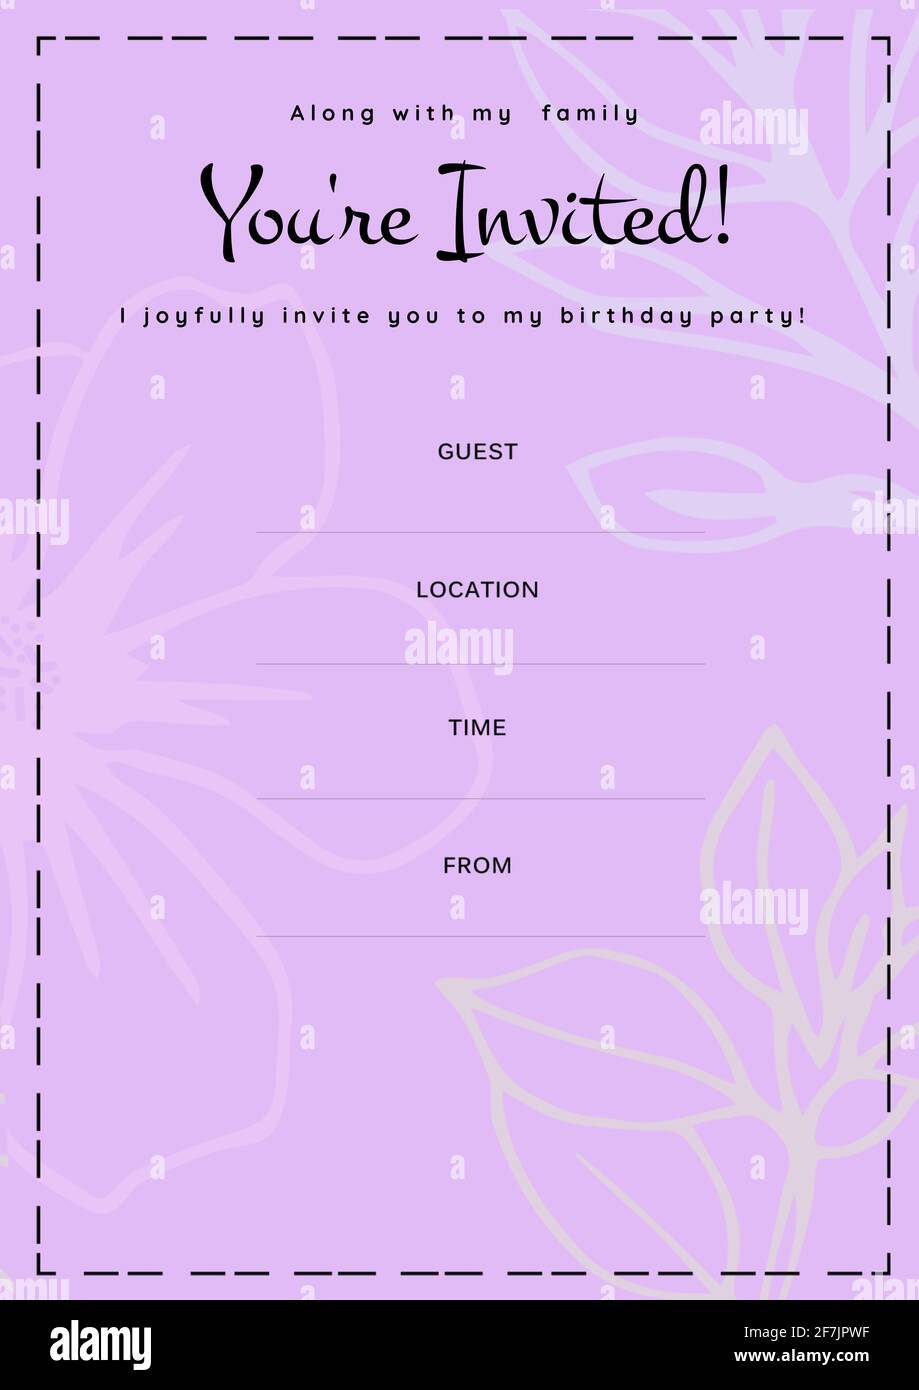 You're invited written in black with white flowers, invite with details space on pink background Stock Photo